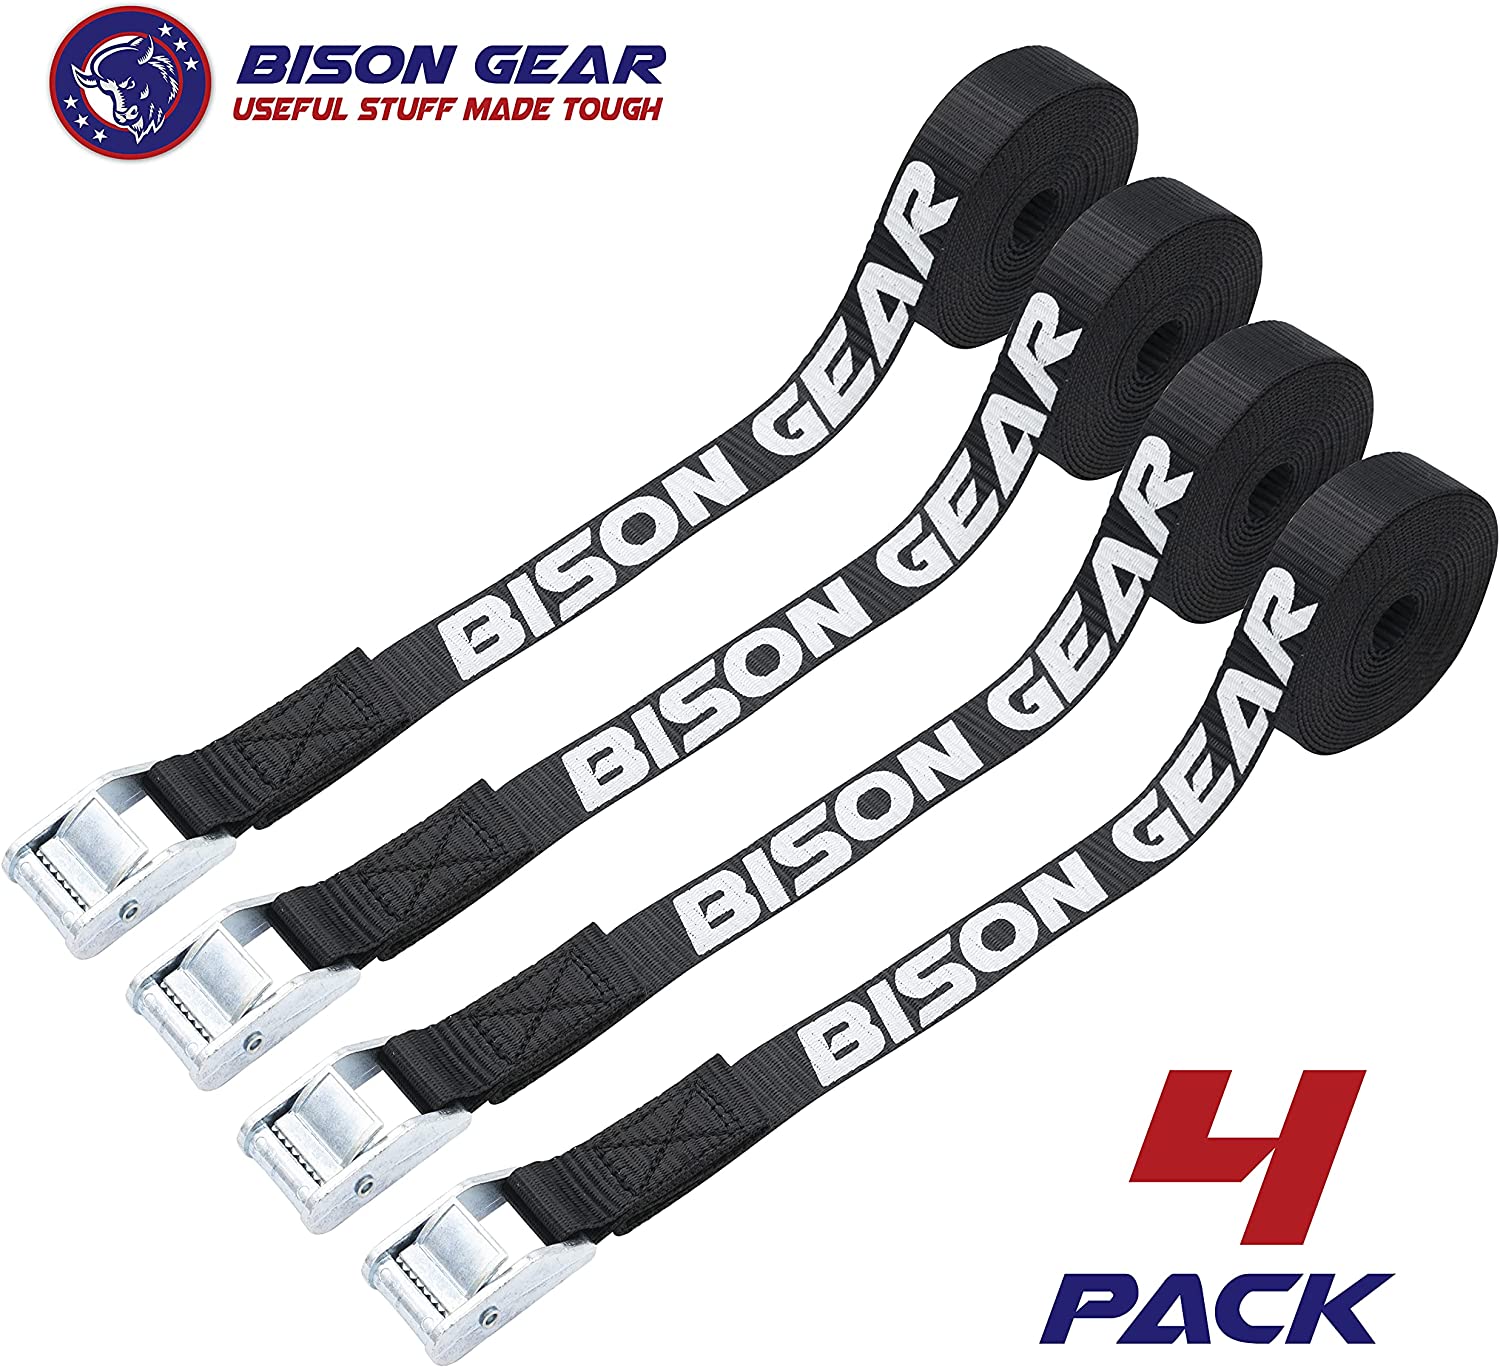 4 Pack T&HI-B07CP3YPDZ Long Tie Down Car Straps Securing Adjustable Cargo Tie Downs For Roof Rack Boat Kayak WowThings Lashing Cam Lock Metal Buckle Strap Up To 600lbs Canoe 